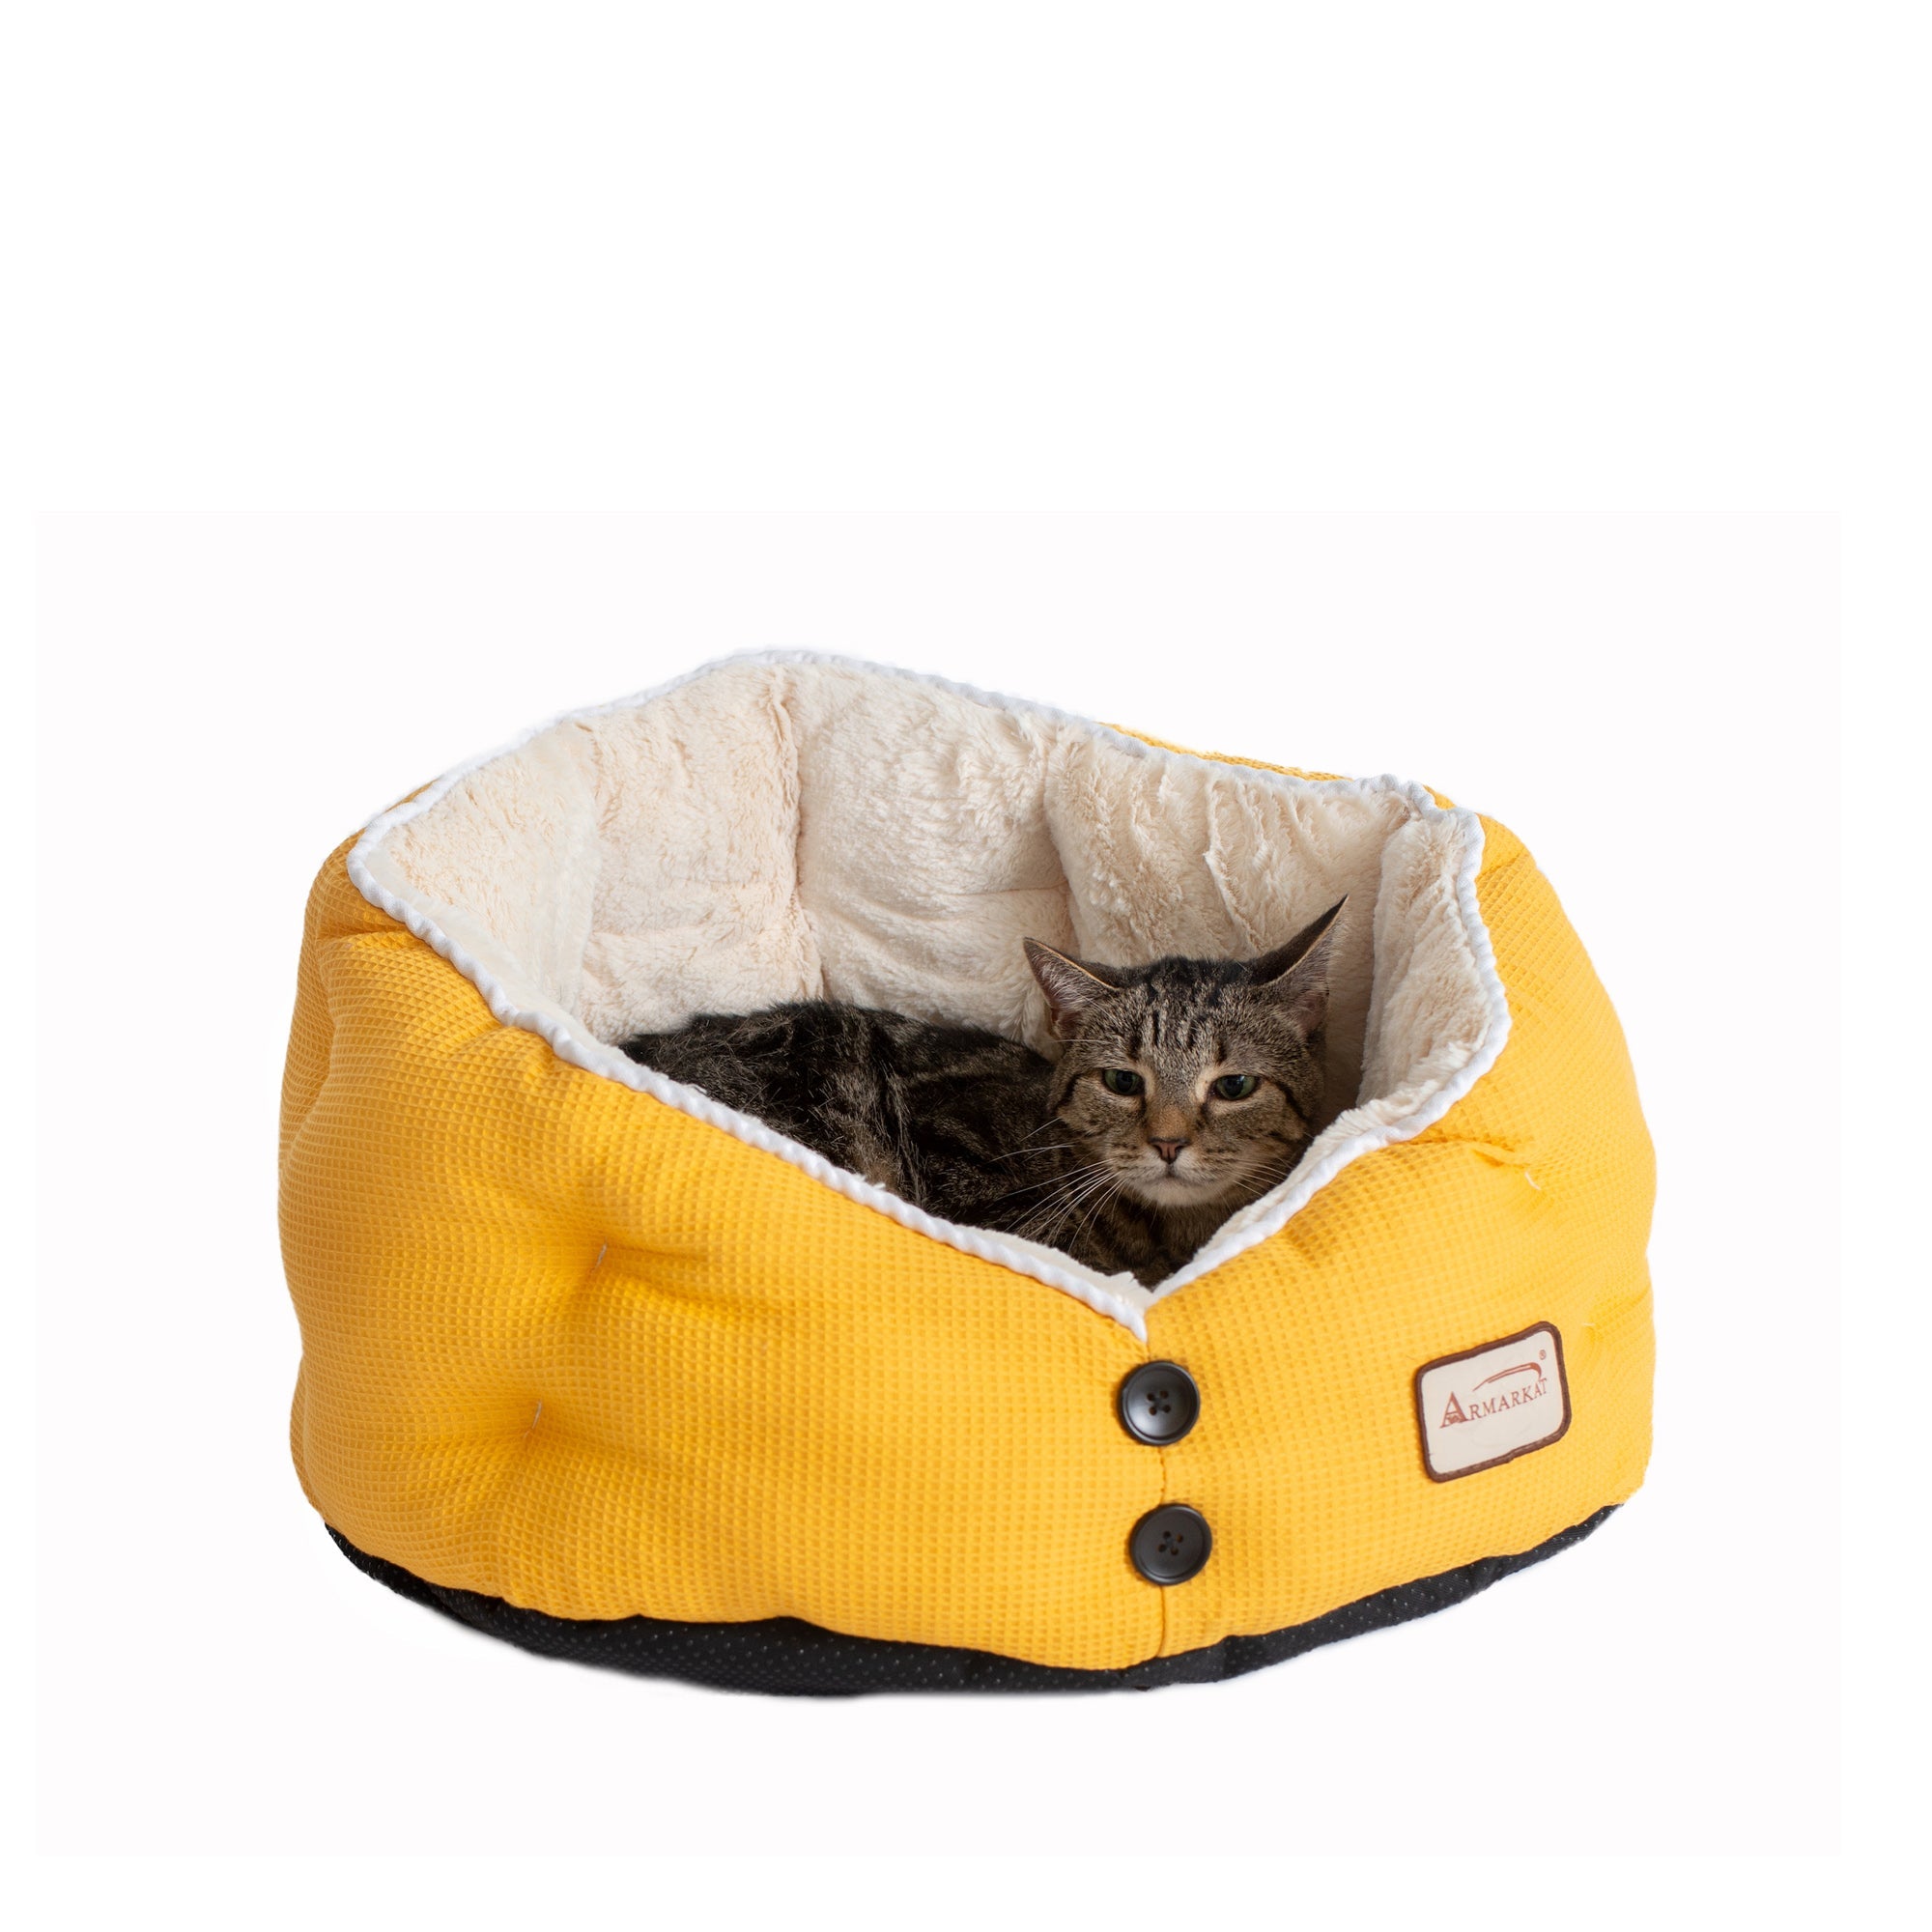 Armarkat Cat Bed C75HMB/MH Gold Waffle and White